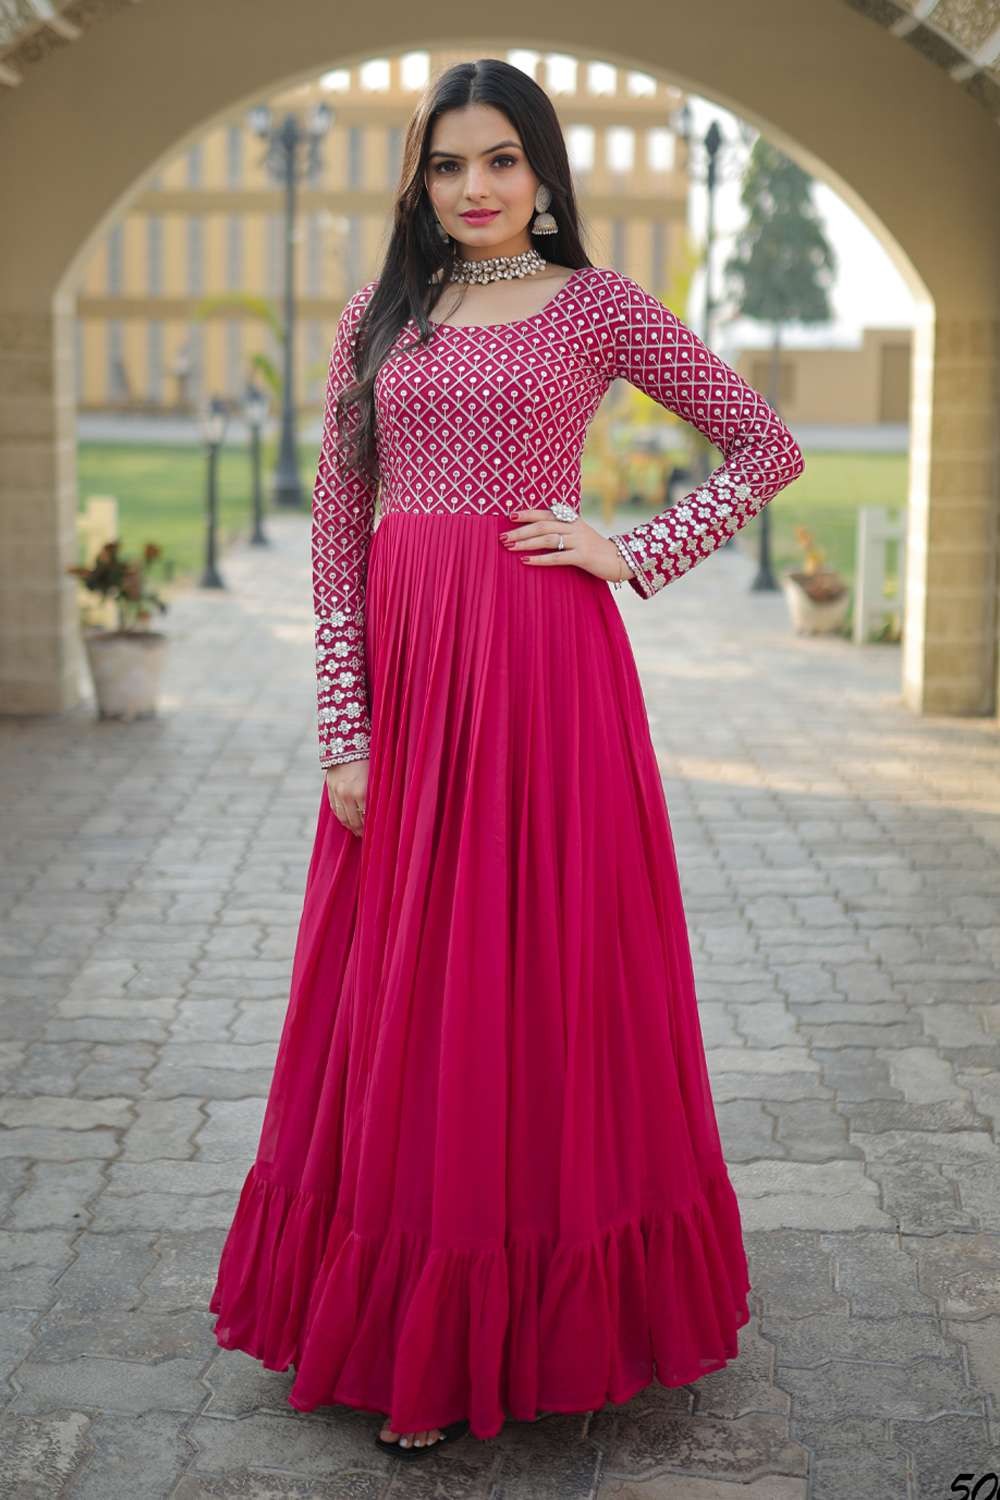 https://media.shopkund.com/media/catalog/product/cache/3/image/9df78eab33525d08d6e5fb8d27136e95/p/r/prt7933-1-georgette-gown-dress-with-embroidered-in-pink-gw0442_1_.jpg